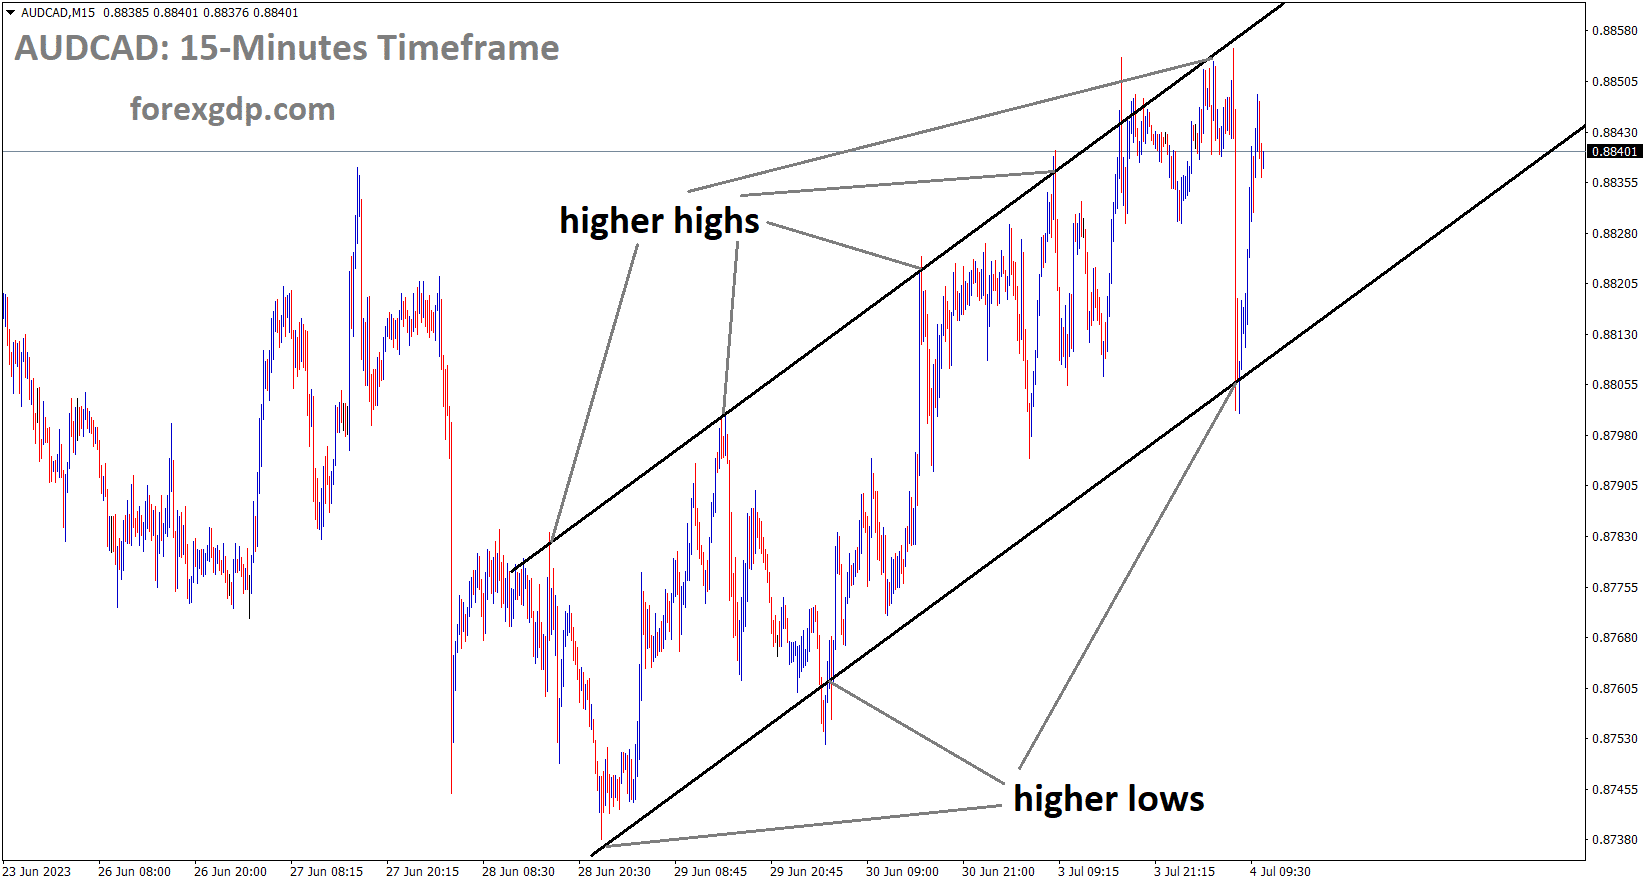 AUDCAD is moving in an Ascending channel and the market has reached the higher high area of the channel